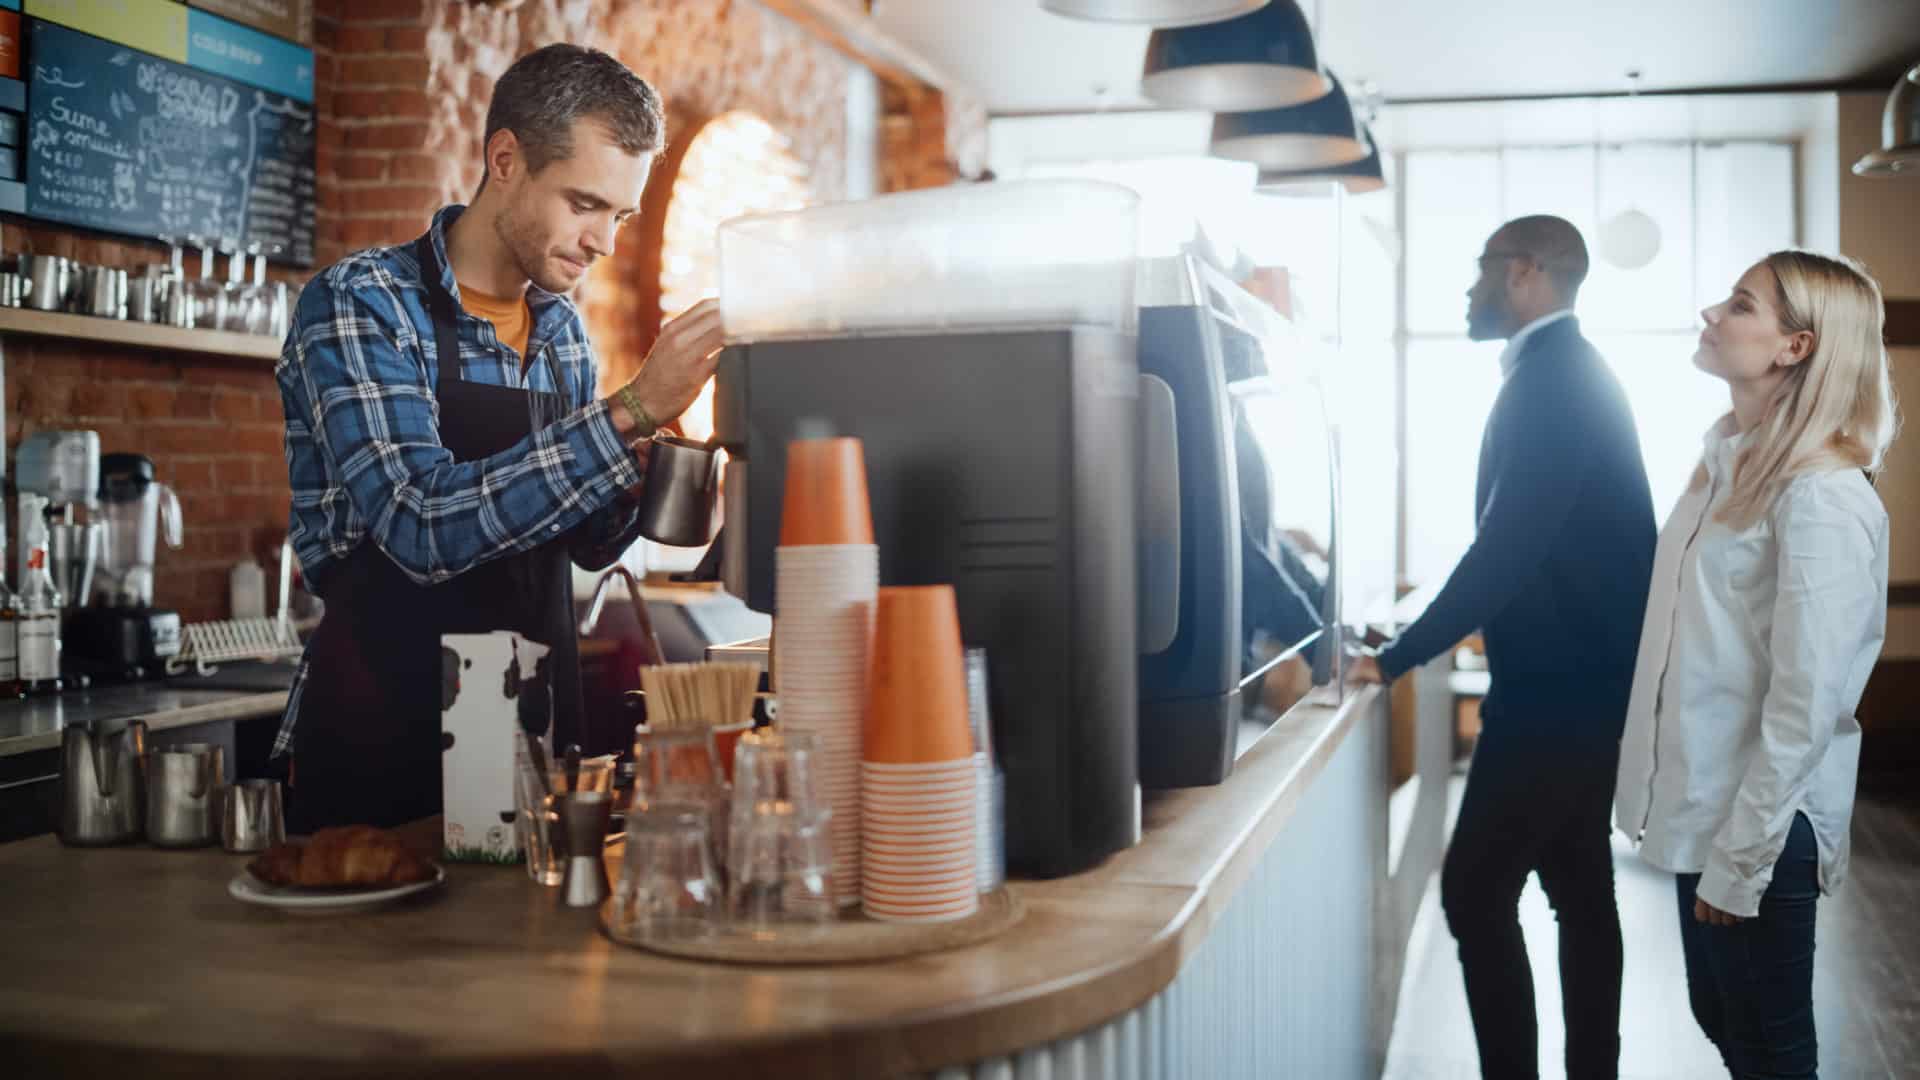 Male Barista in Checkered Shirt is Making a Latte for a Customer in a Coffee Shop